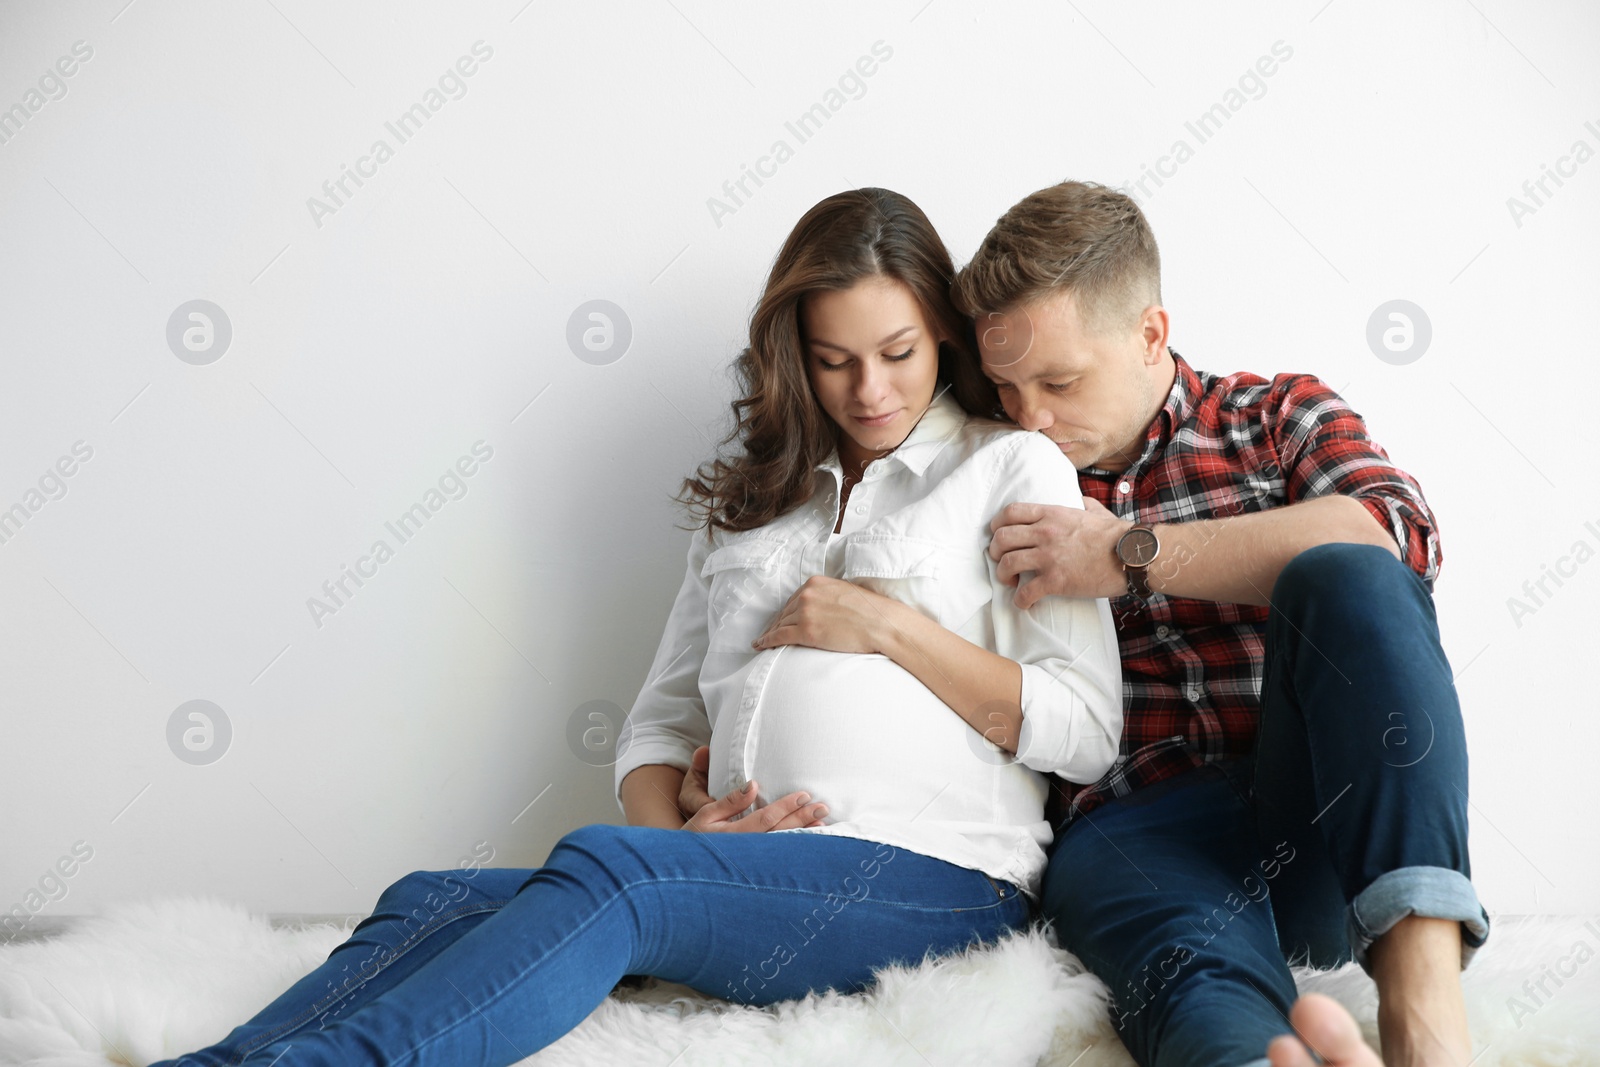 Photo of Pregnant woman with her husband near white wall. Space for text